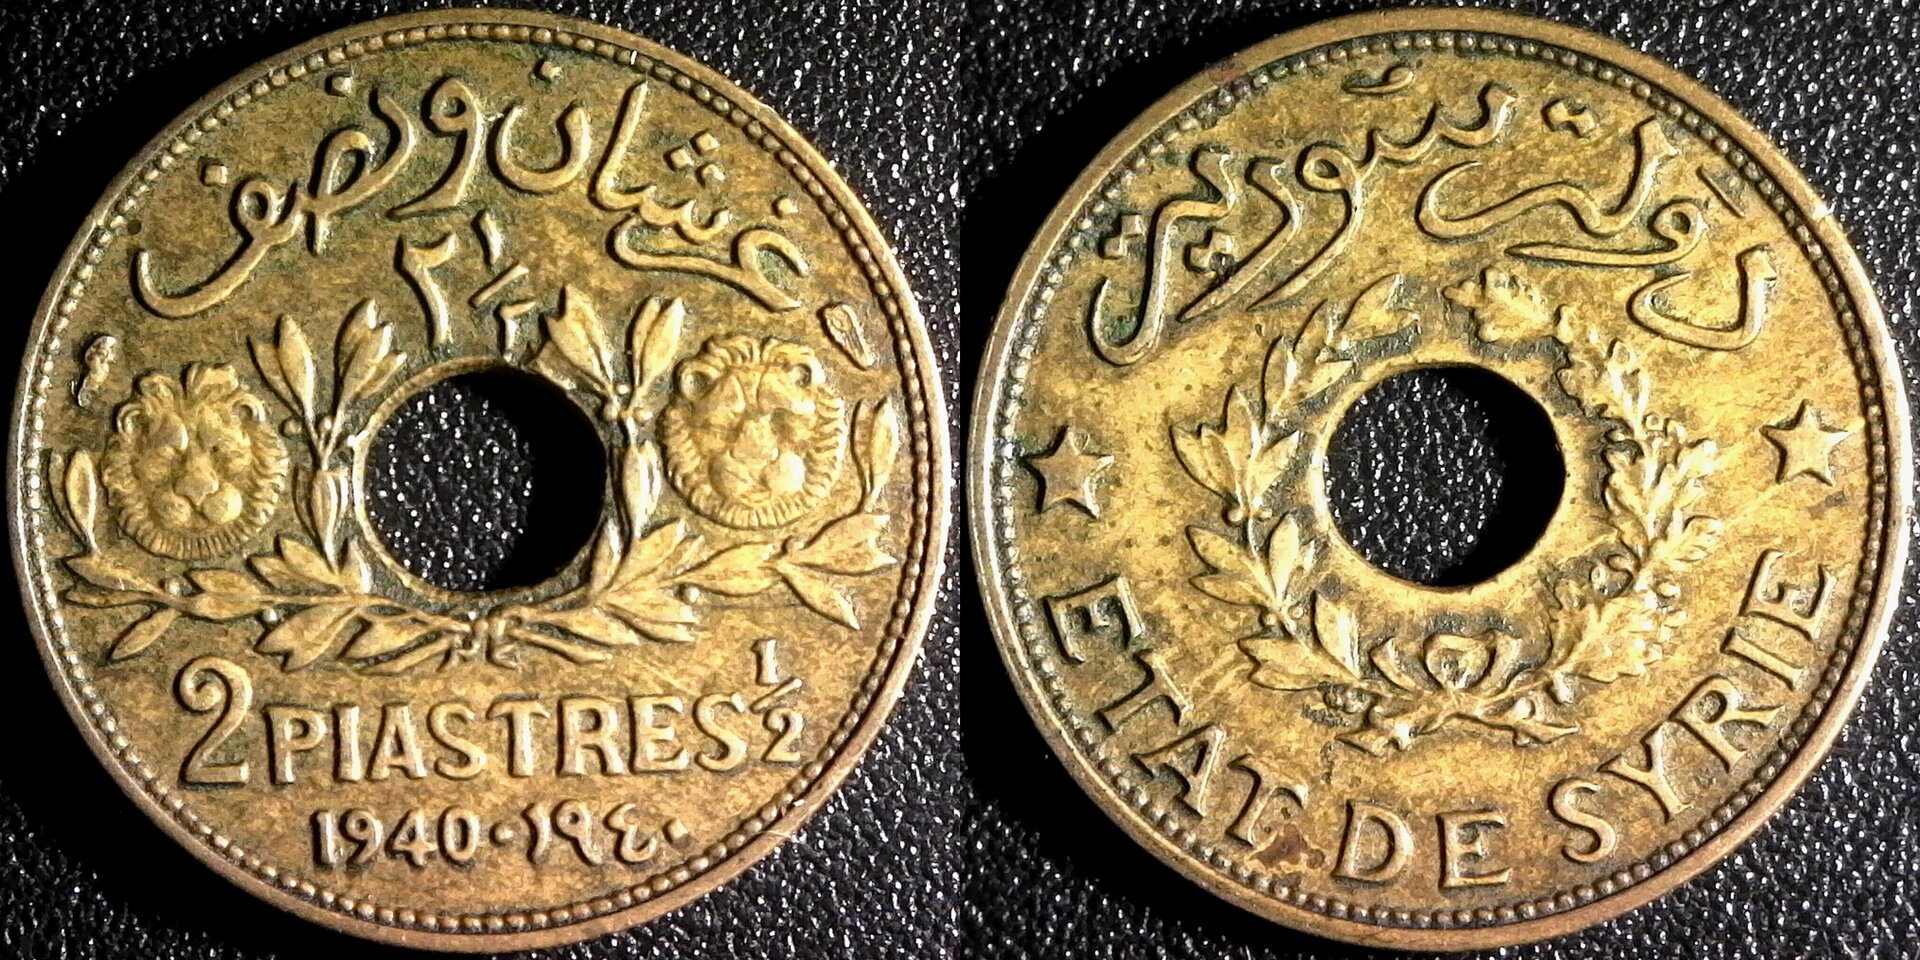 Syria 2 and a half Piastres  1940 obv-side.jpg